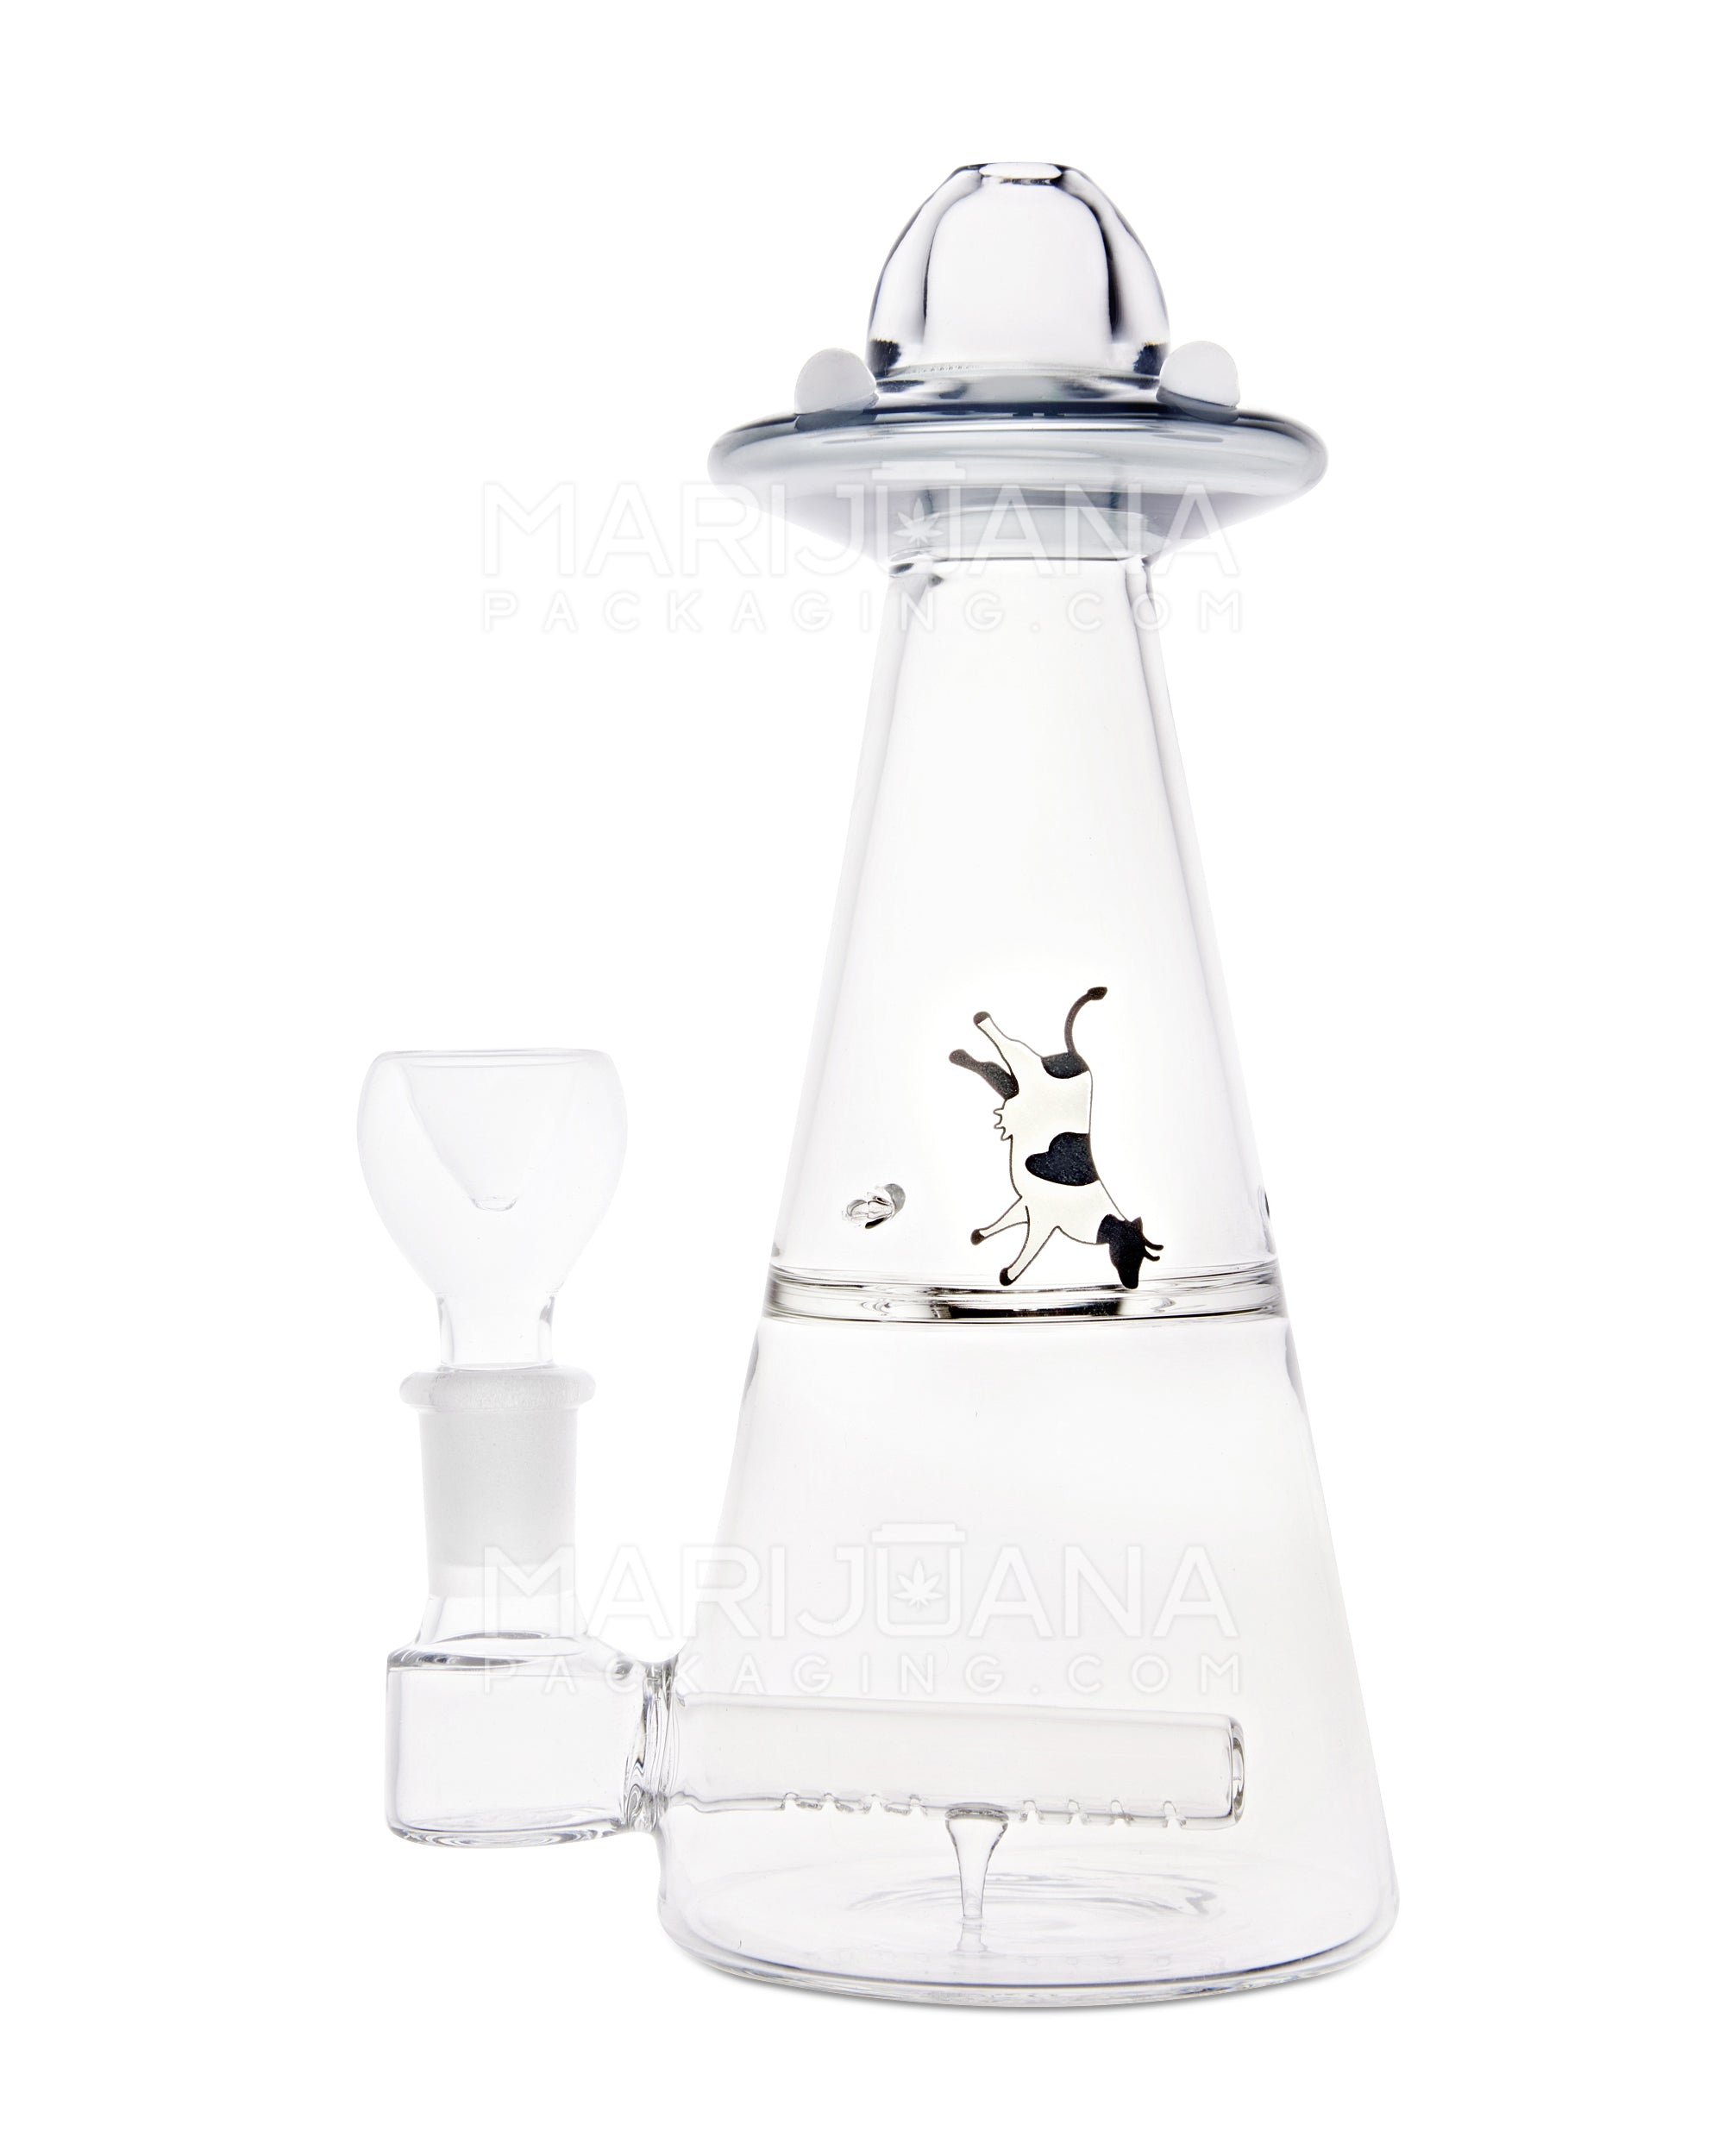 HEMPER | UFO Vortex Glass Water Pipe w/ Cow Decal | 7in Tall - 14mm Bowl - Assorted